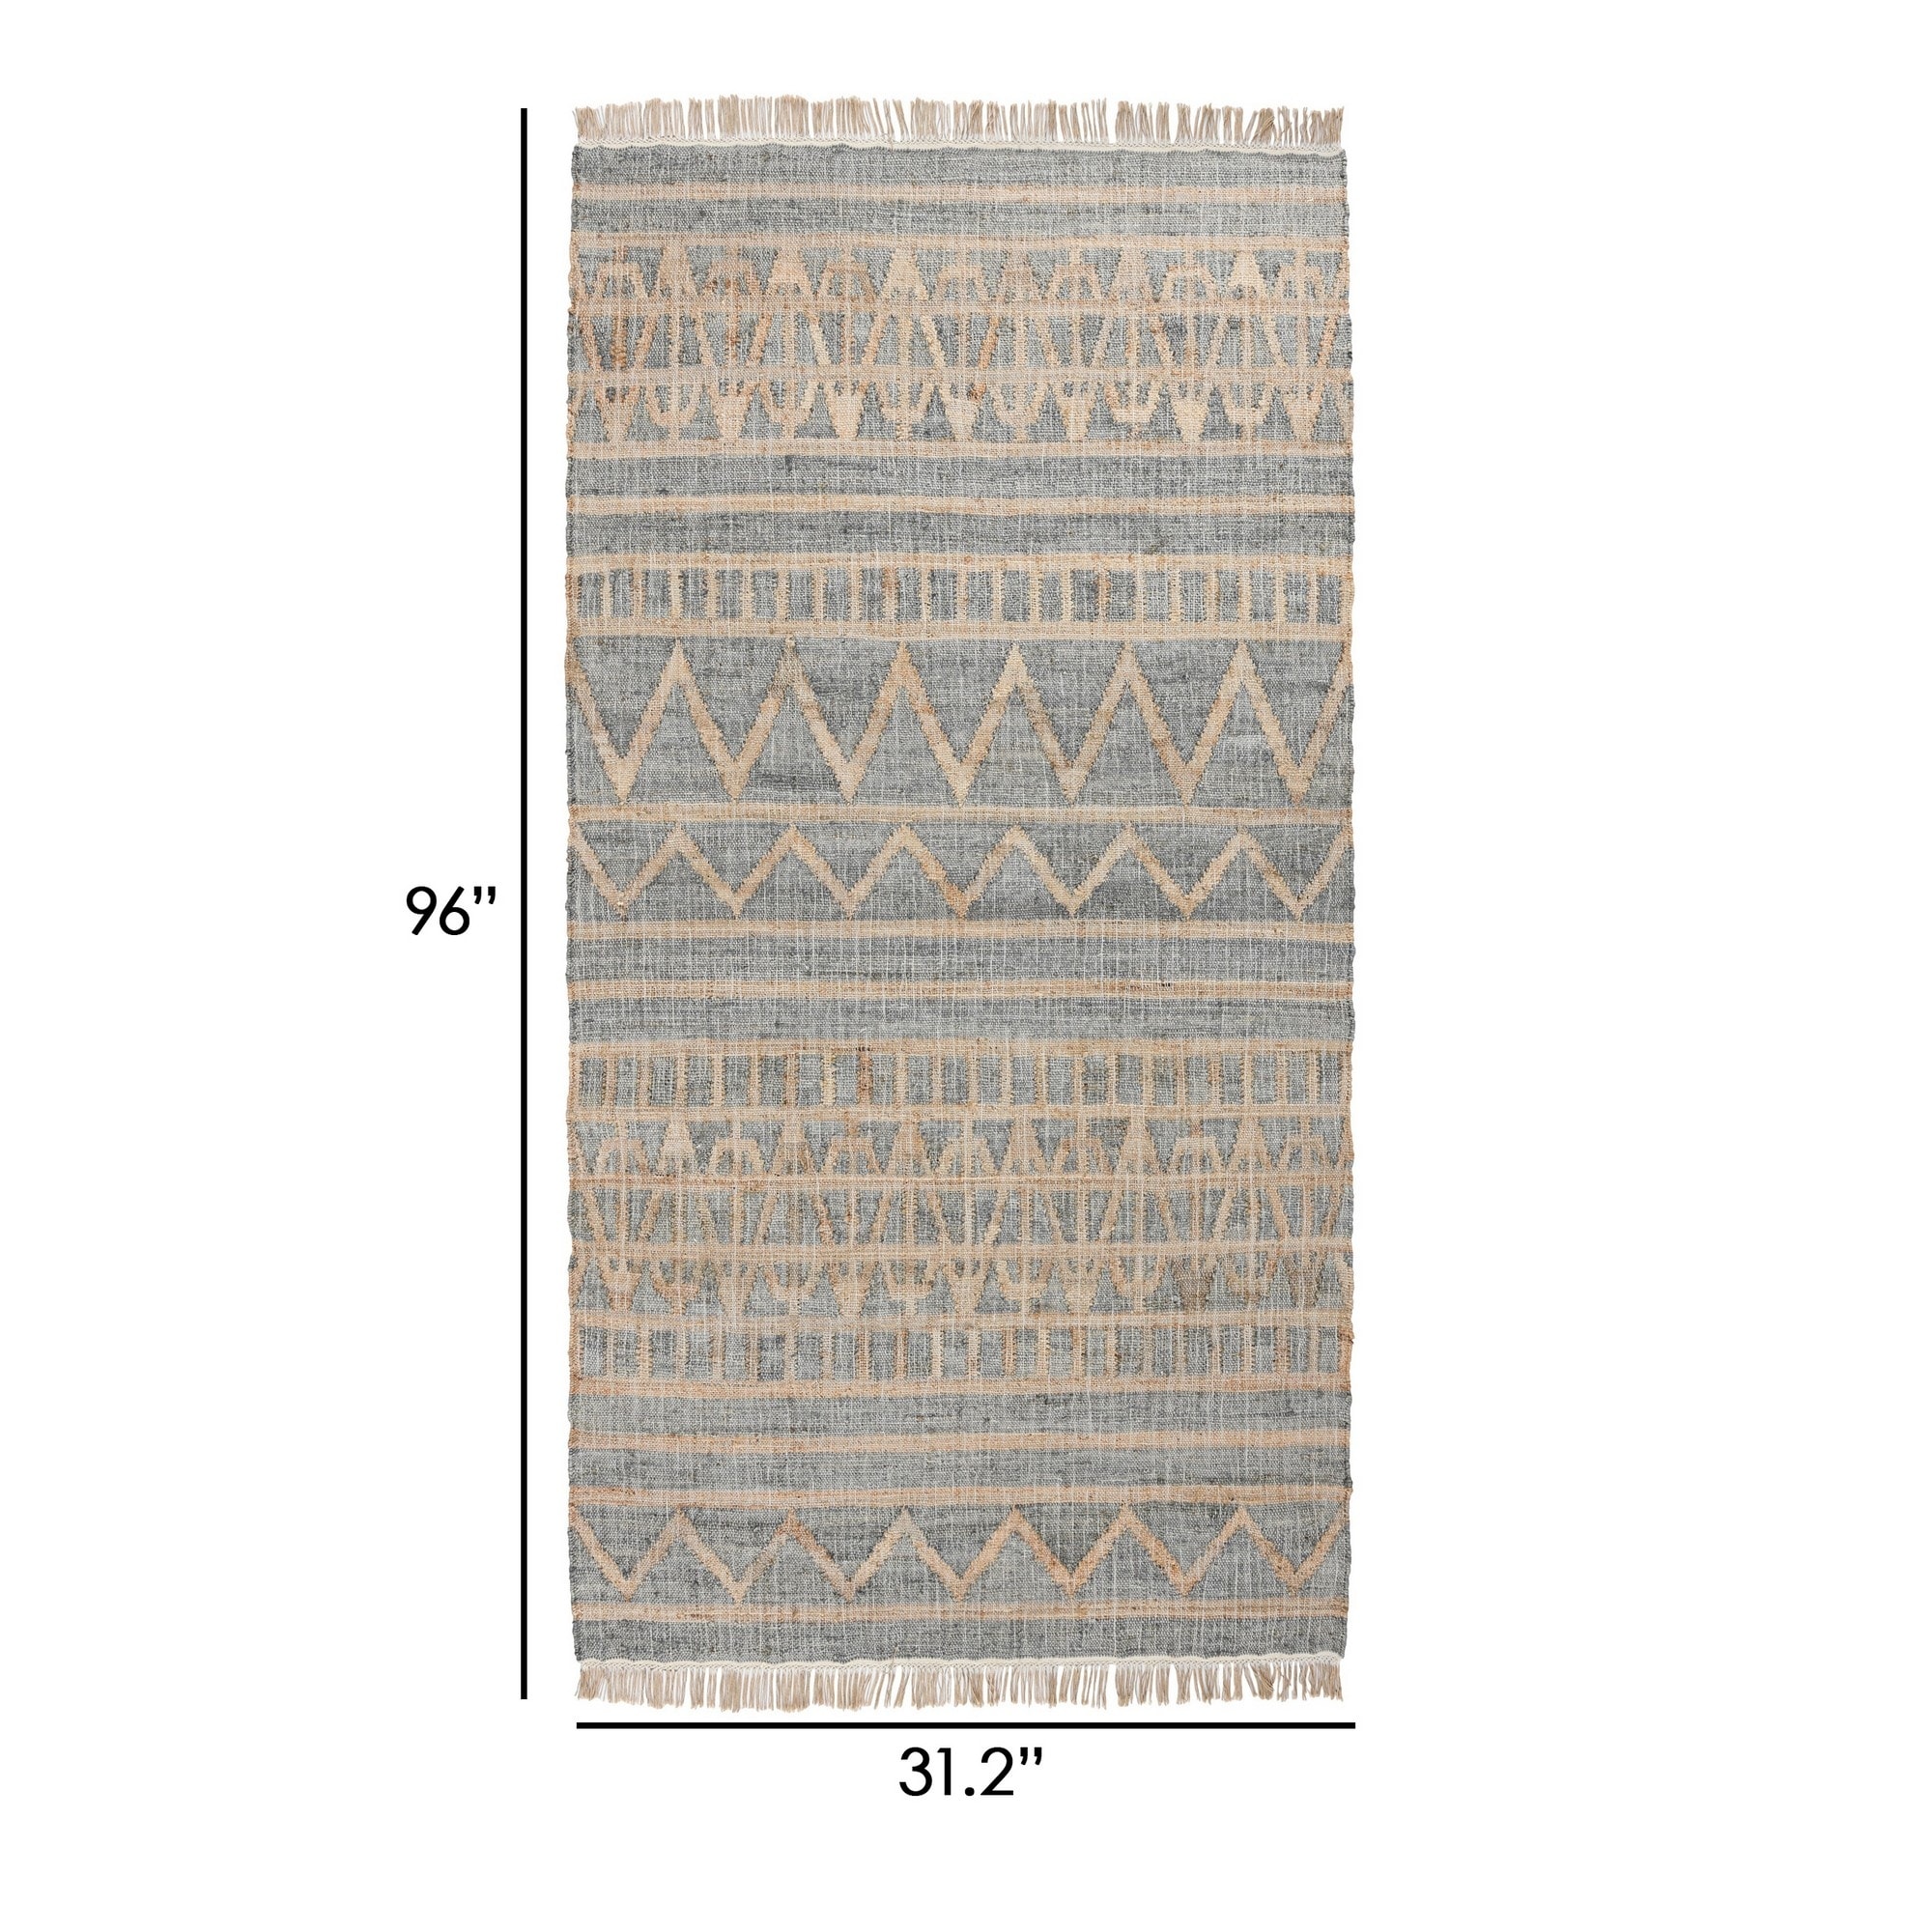 Myra 3 x 8 Area Rug, Soft Handwoven Moroccan Pattern, Brown and Blue Jute - 9'3" x 12'3"